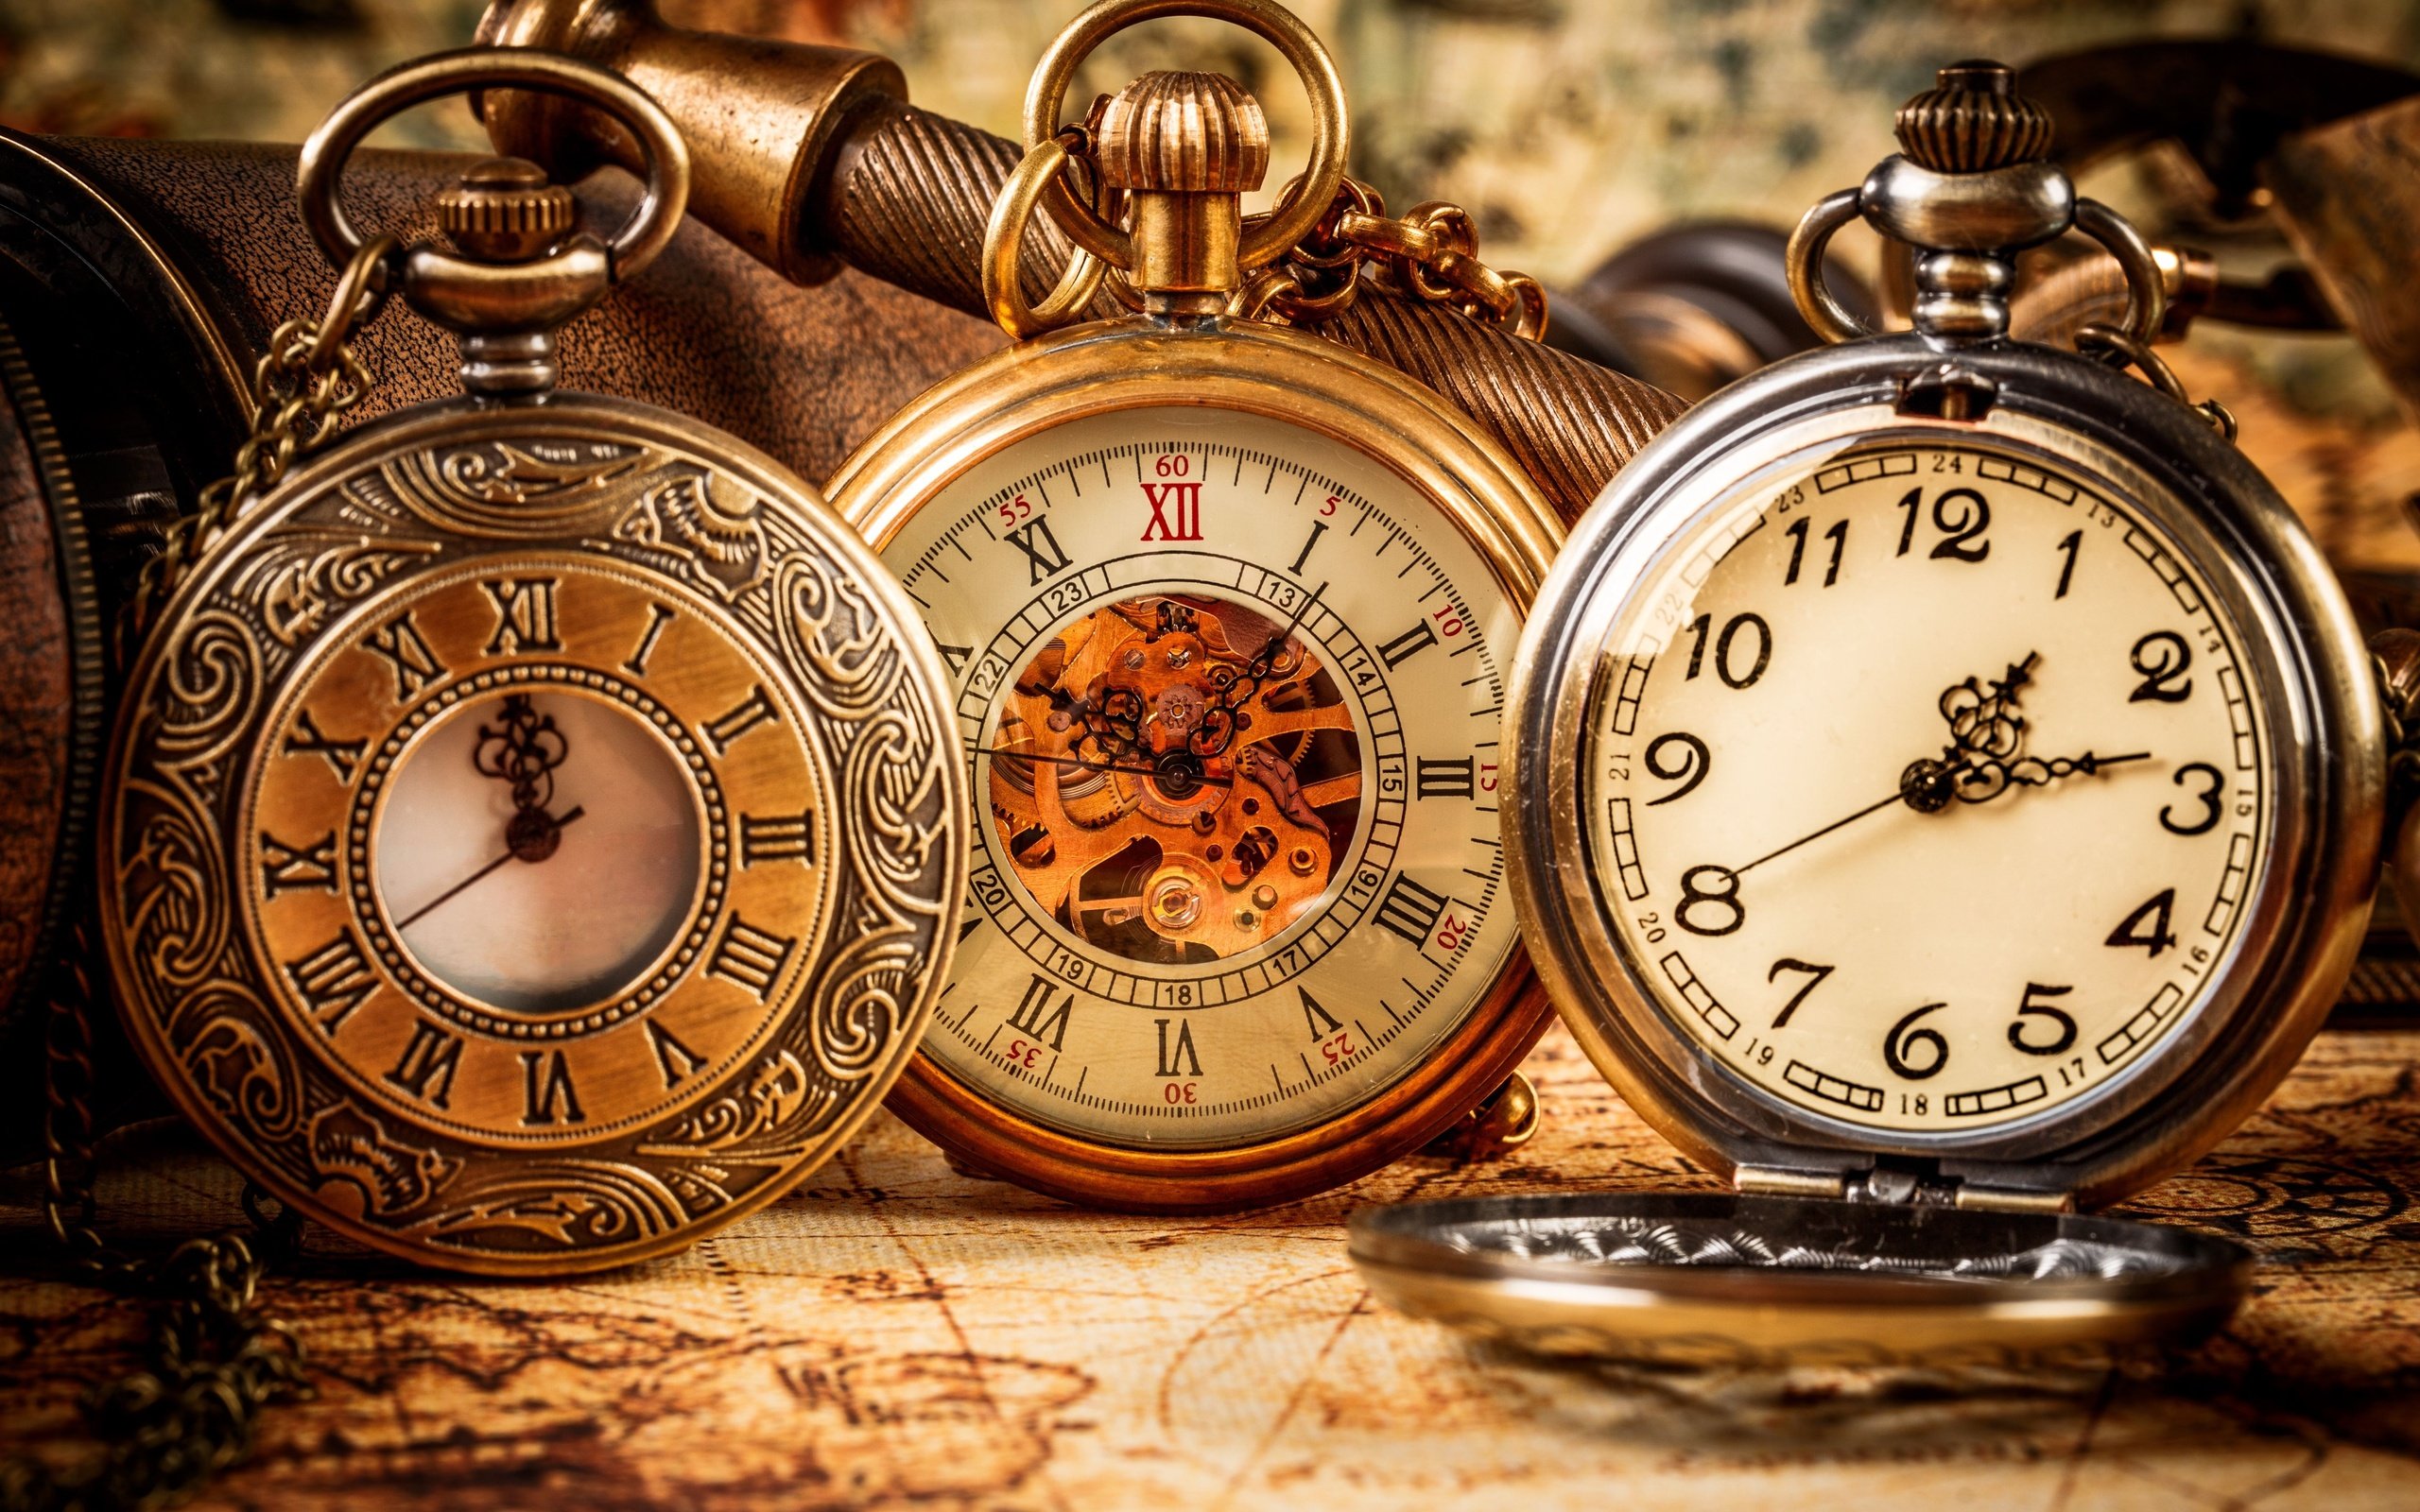 Retrp Antique Pocket Watches Wallpapers HD / Desktop and Mobile Backgrounds